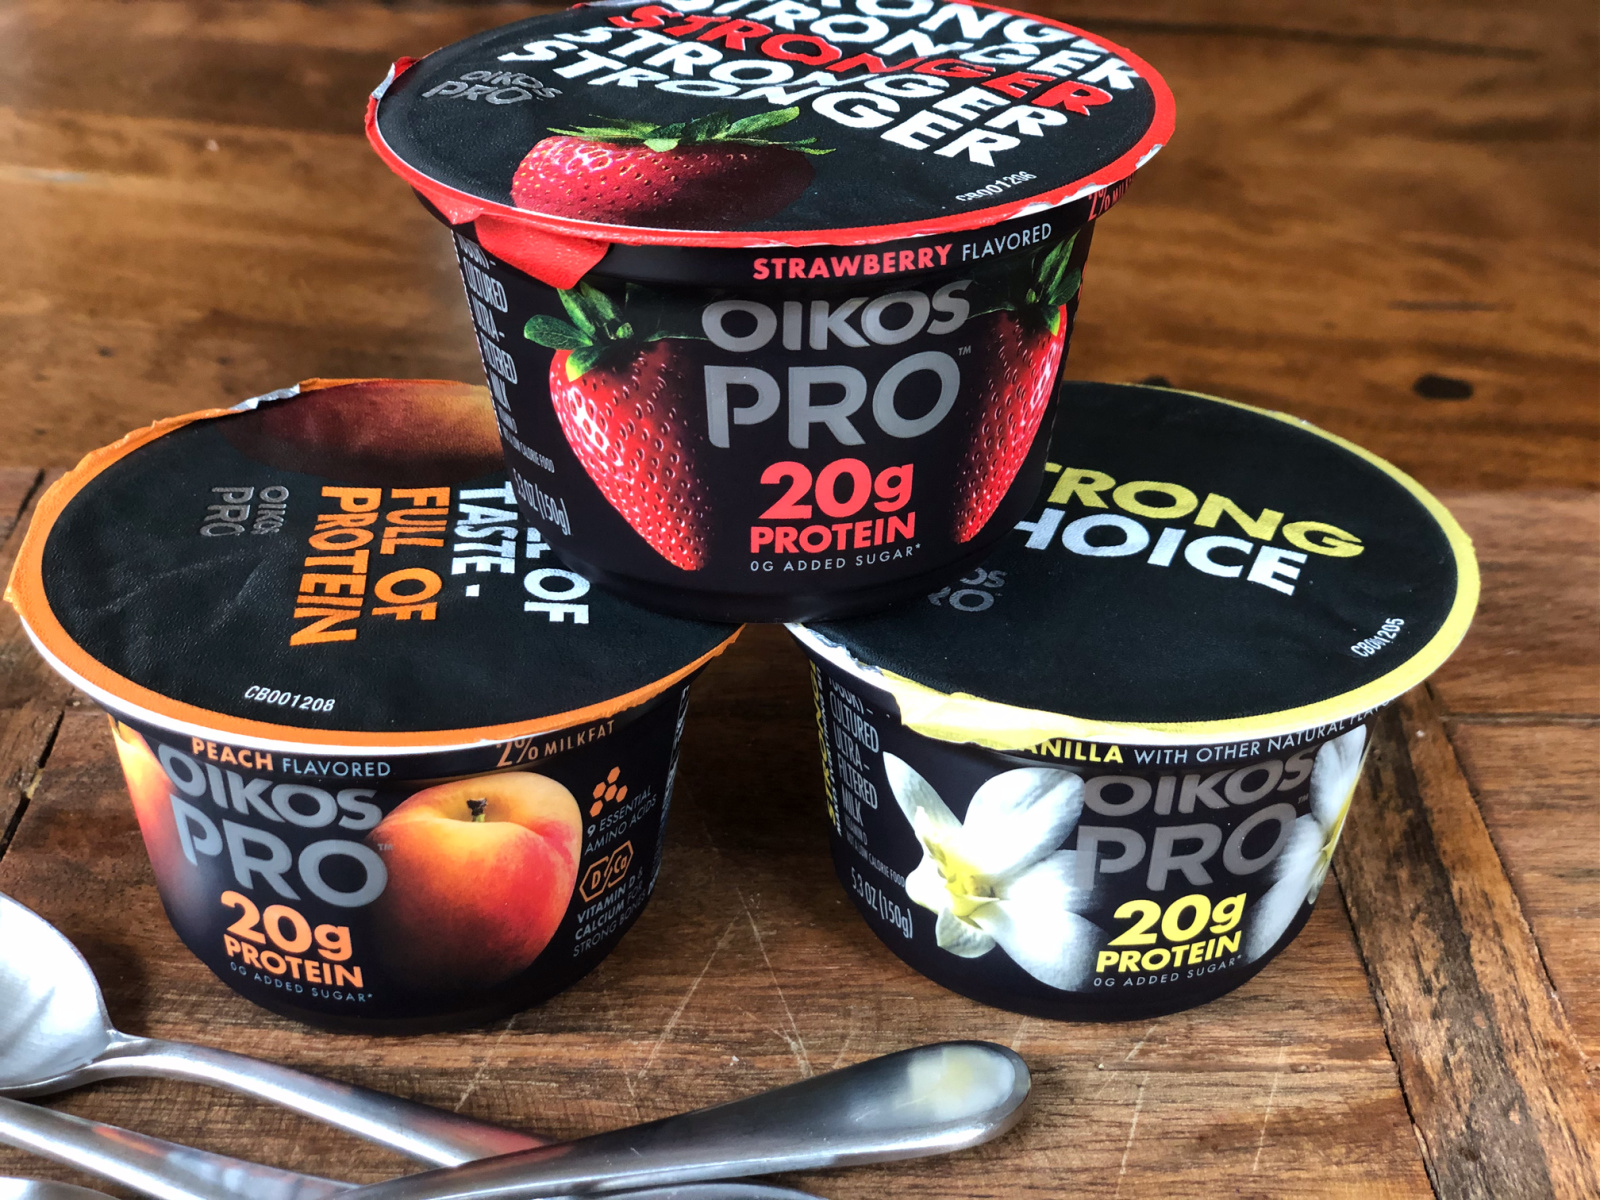 Dannon Oikos Pro Packs A Protein Punch For Your Day!